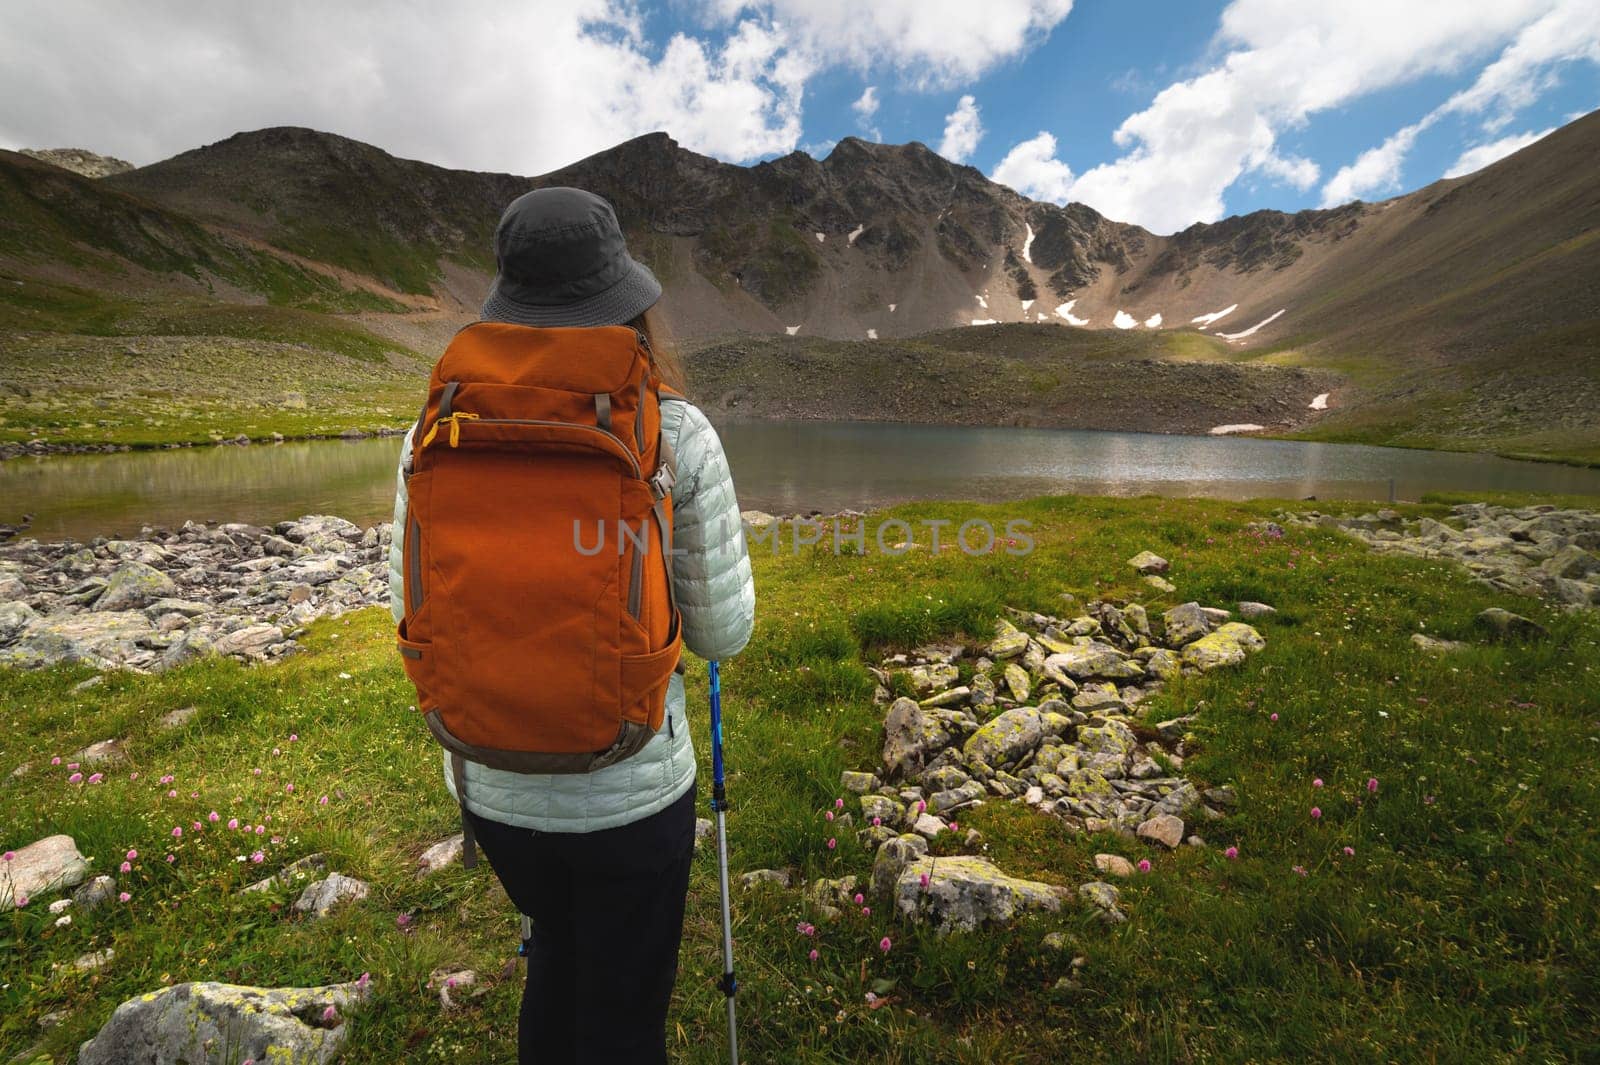 A traveling free man with an orange backpack walks along a path towards a high mountain range and a lake. Dramatic landscape with a tourist high in the mountains.